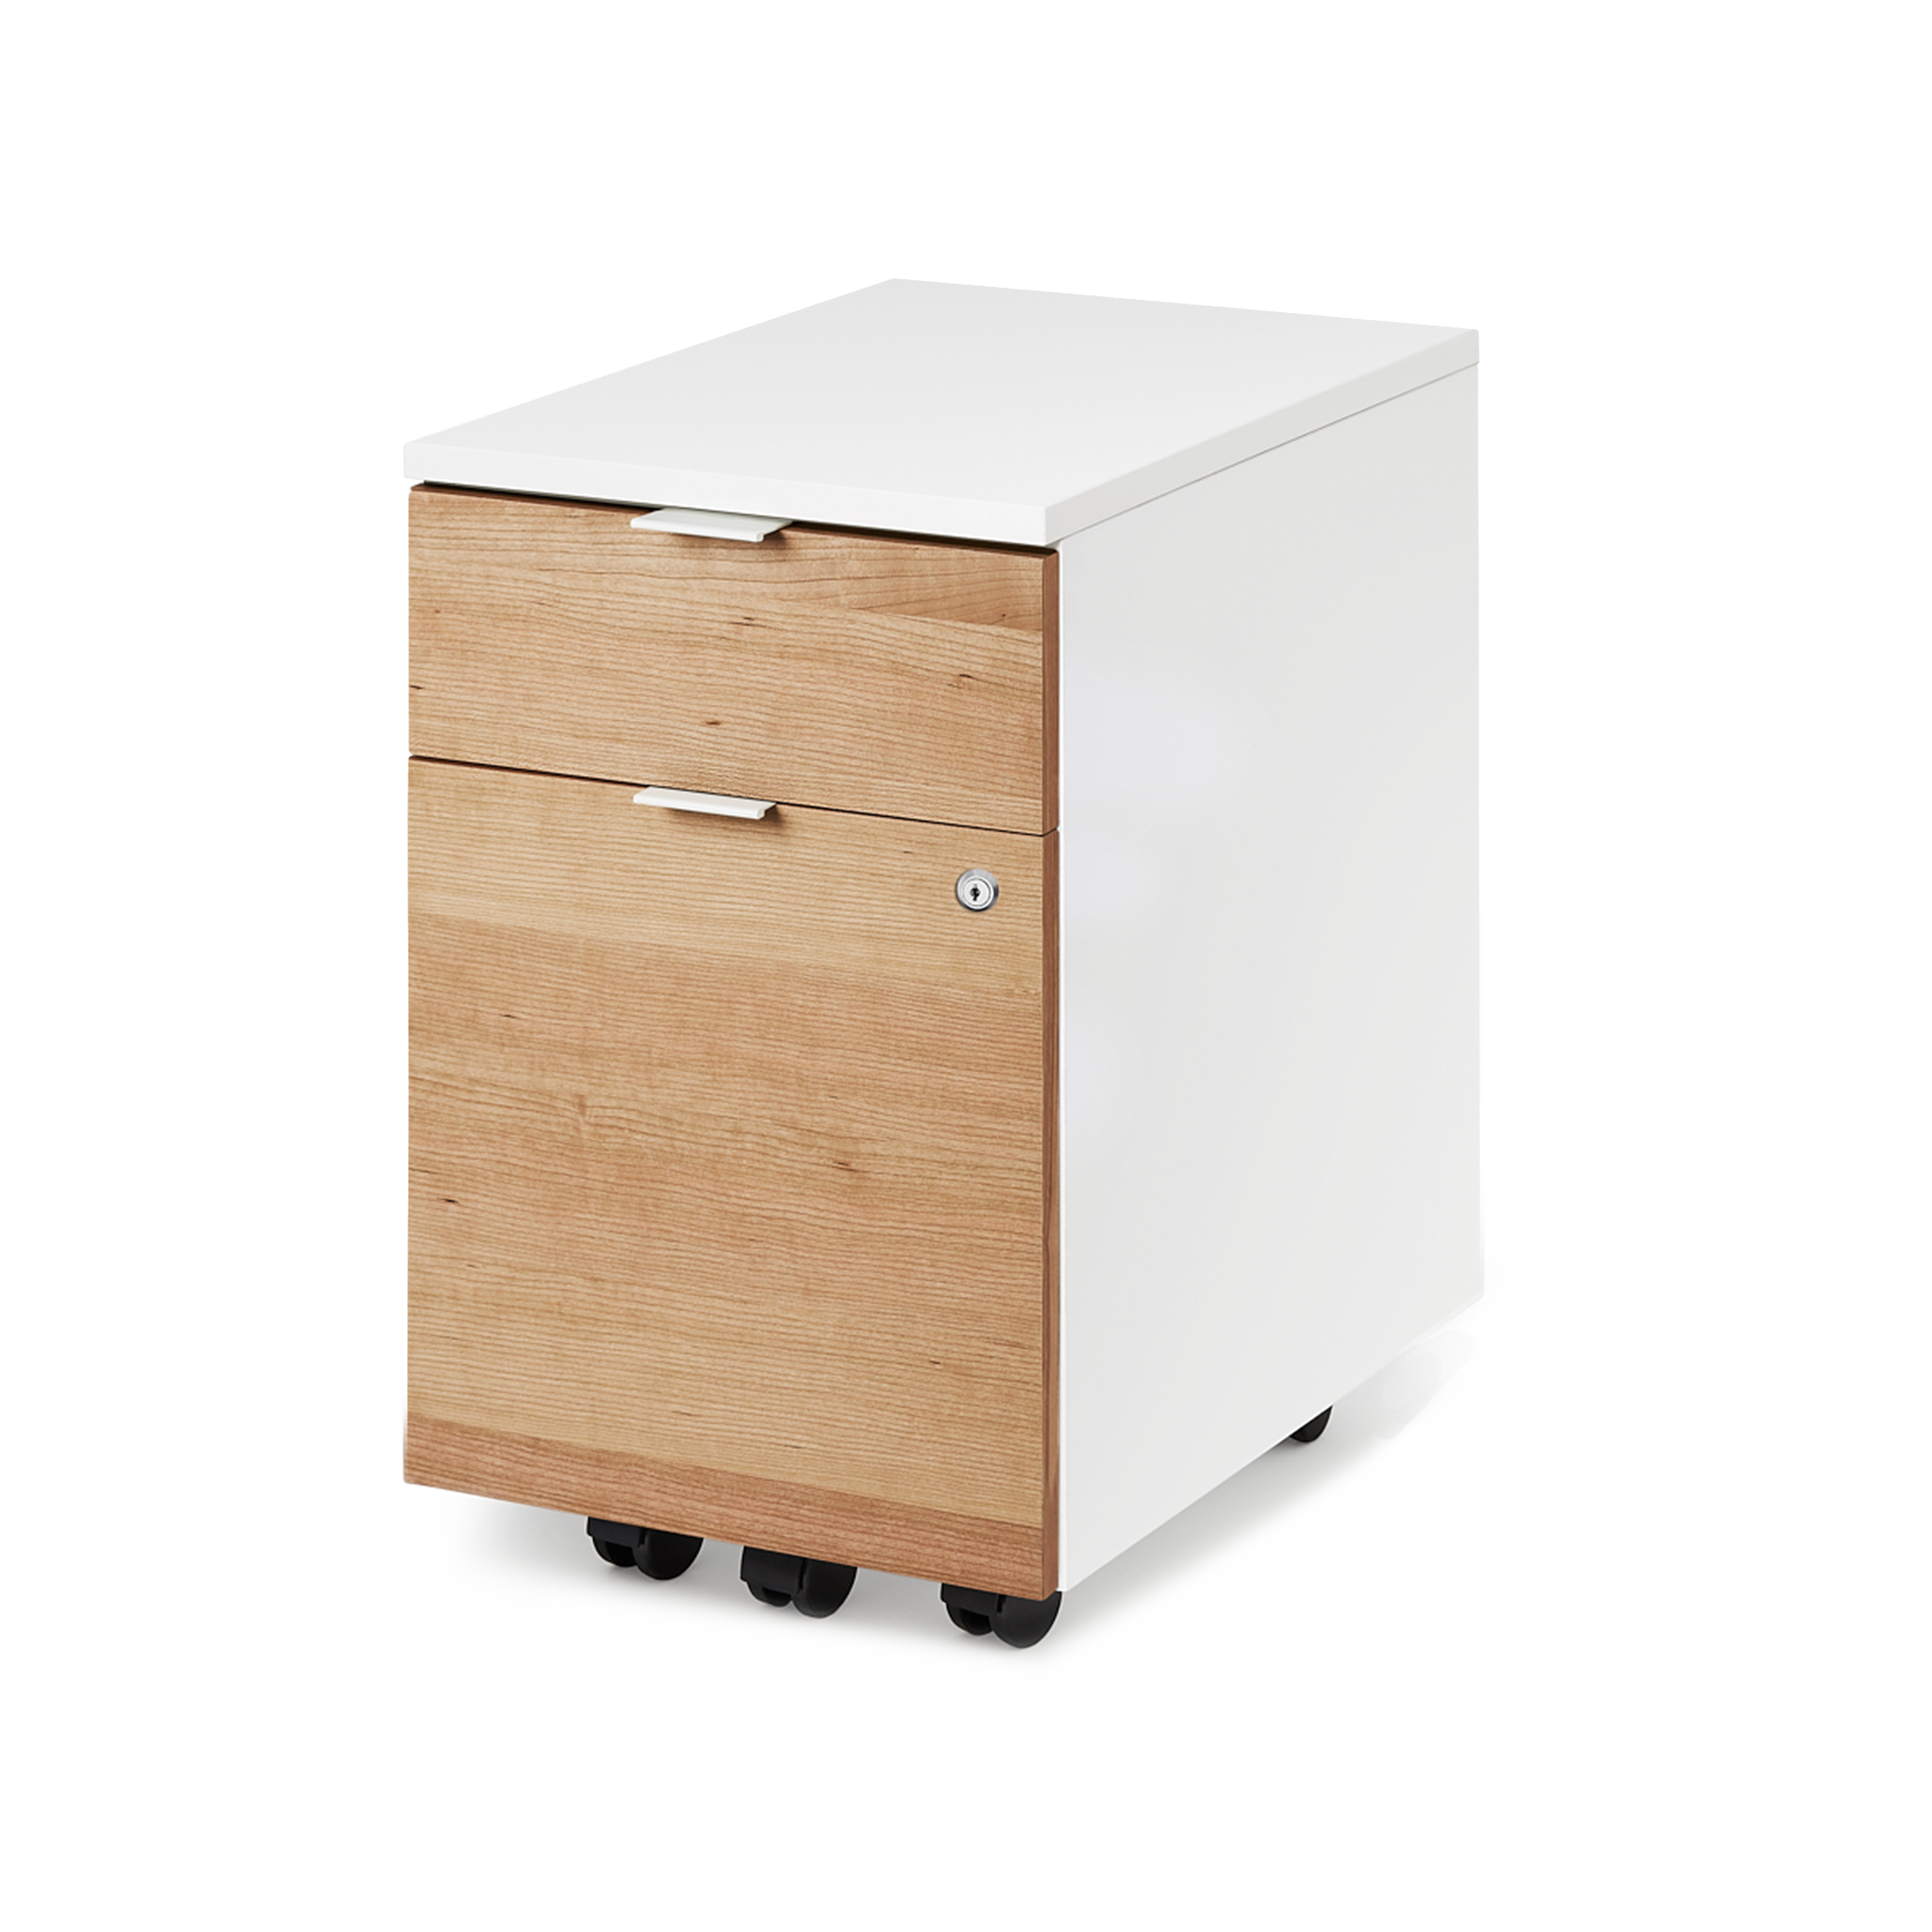 Almost Perfect Neat Filing Cabinet - White-Cherrywood - Blanc-Cerisier